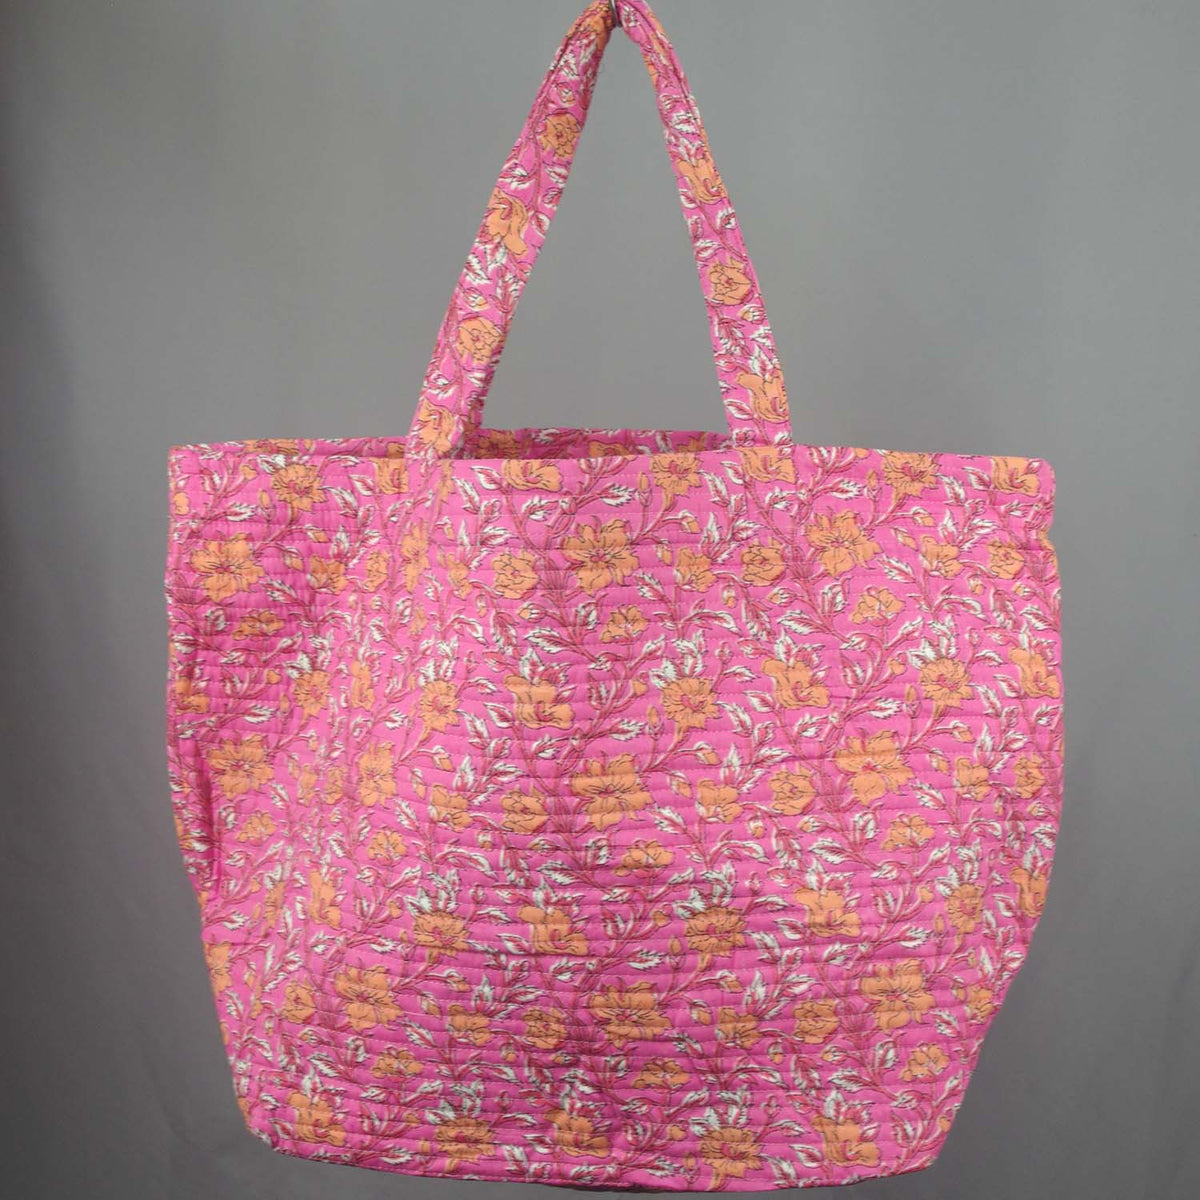 Cotton Quilted Large Shoppping / Beach Bag - Pink Orange Floral Print